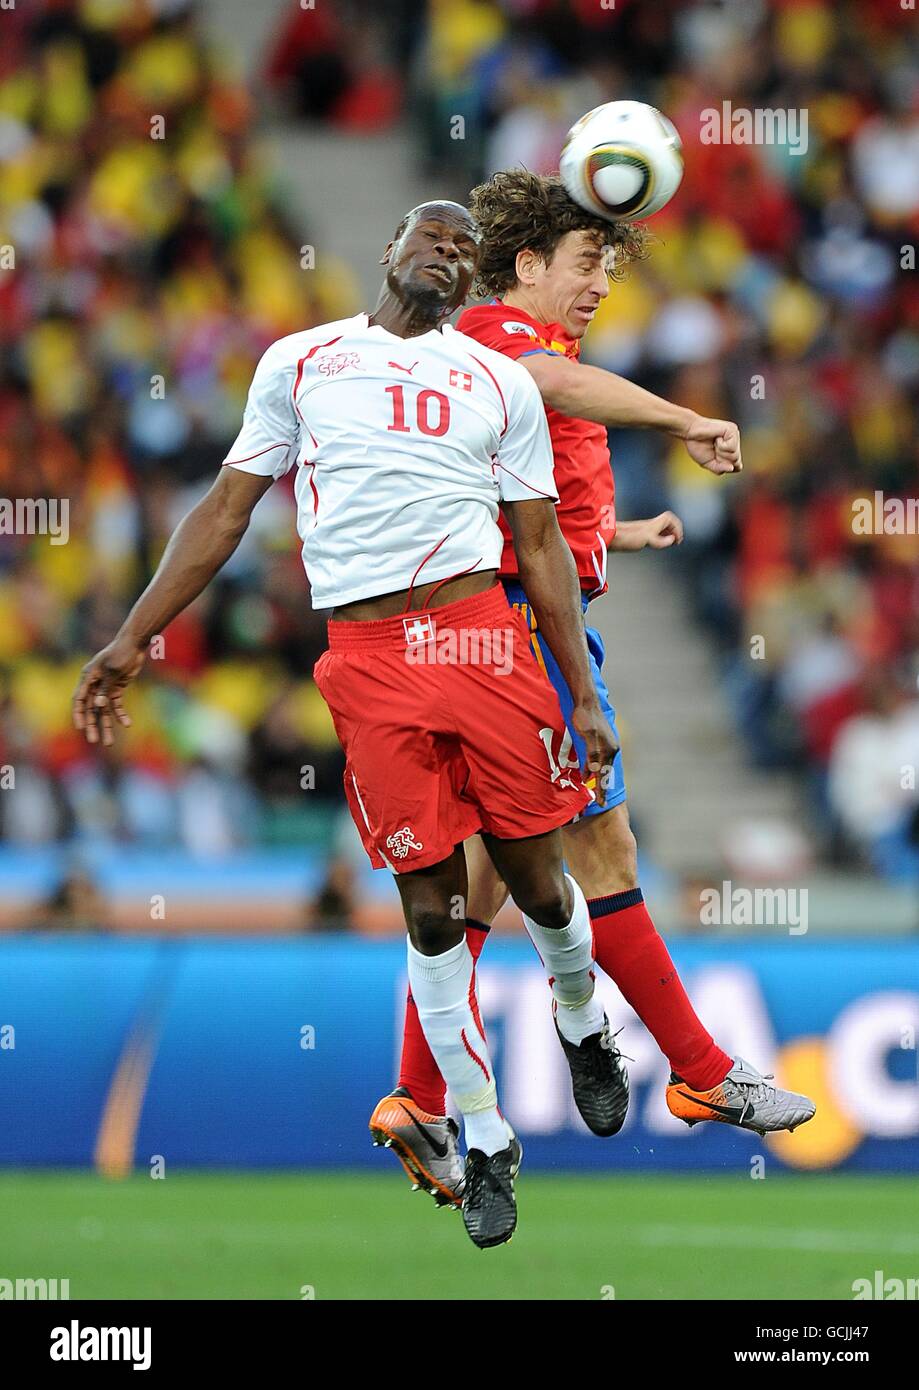 Soccer - 2010 FIFA World Cup South Africa - Group H - Switzerland v Spain - Durban Stadium. Switzerland's Blaise Nkufo (left) and Spain's Carles Puyol battle for the ball Stock Photo